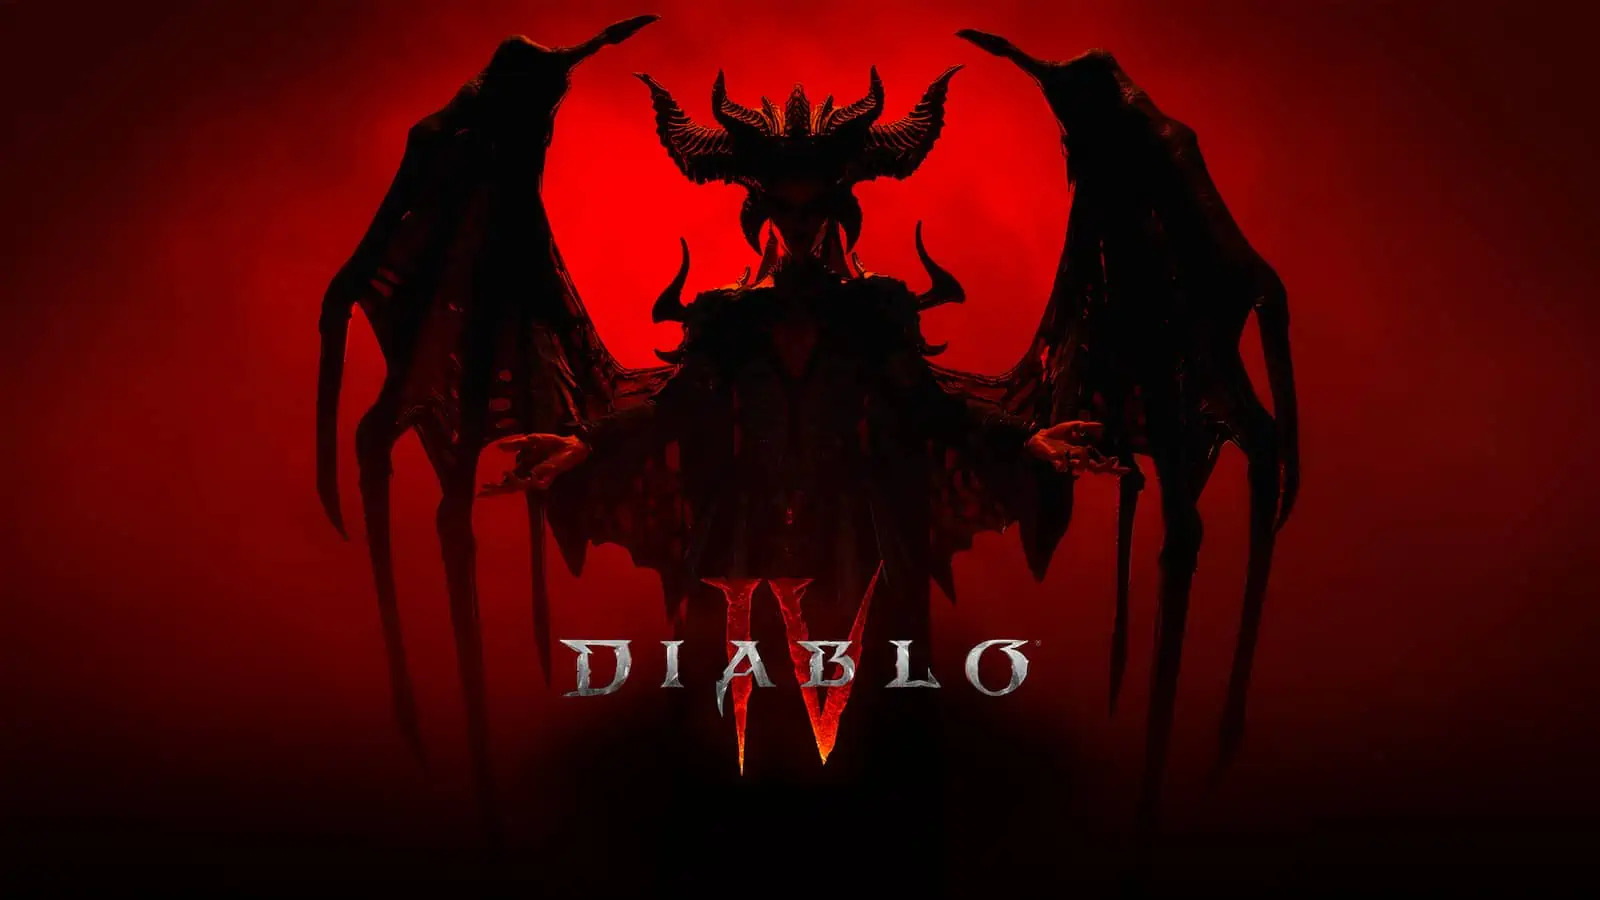 When is it possible to preload Diablo IV so as not to wait for launch day?

